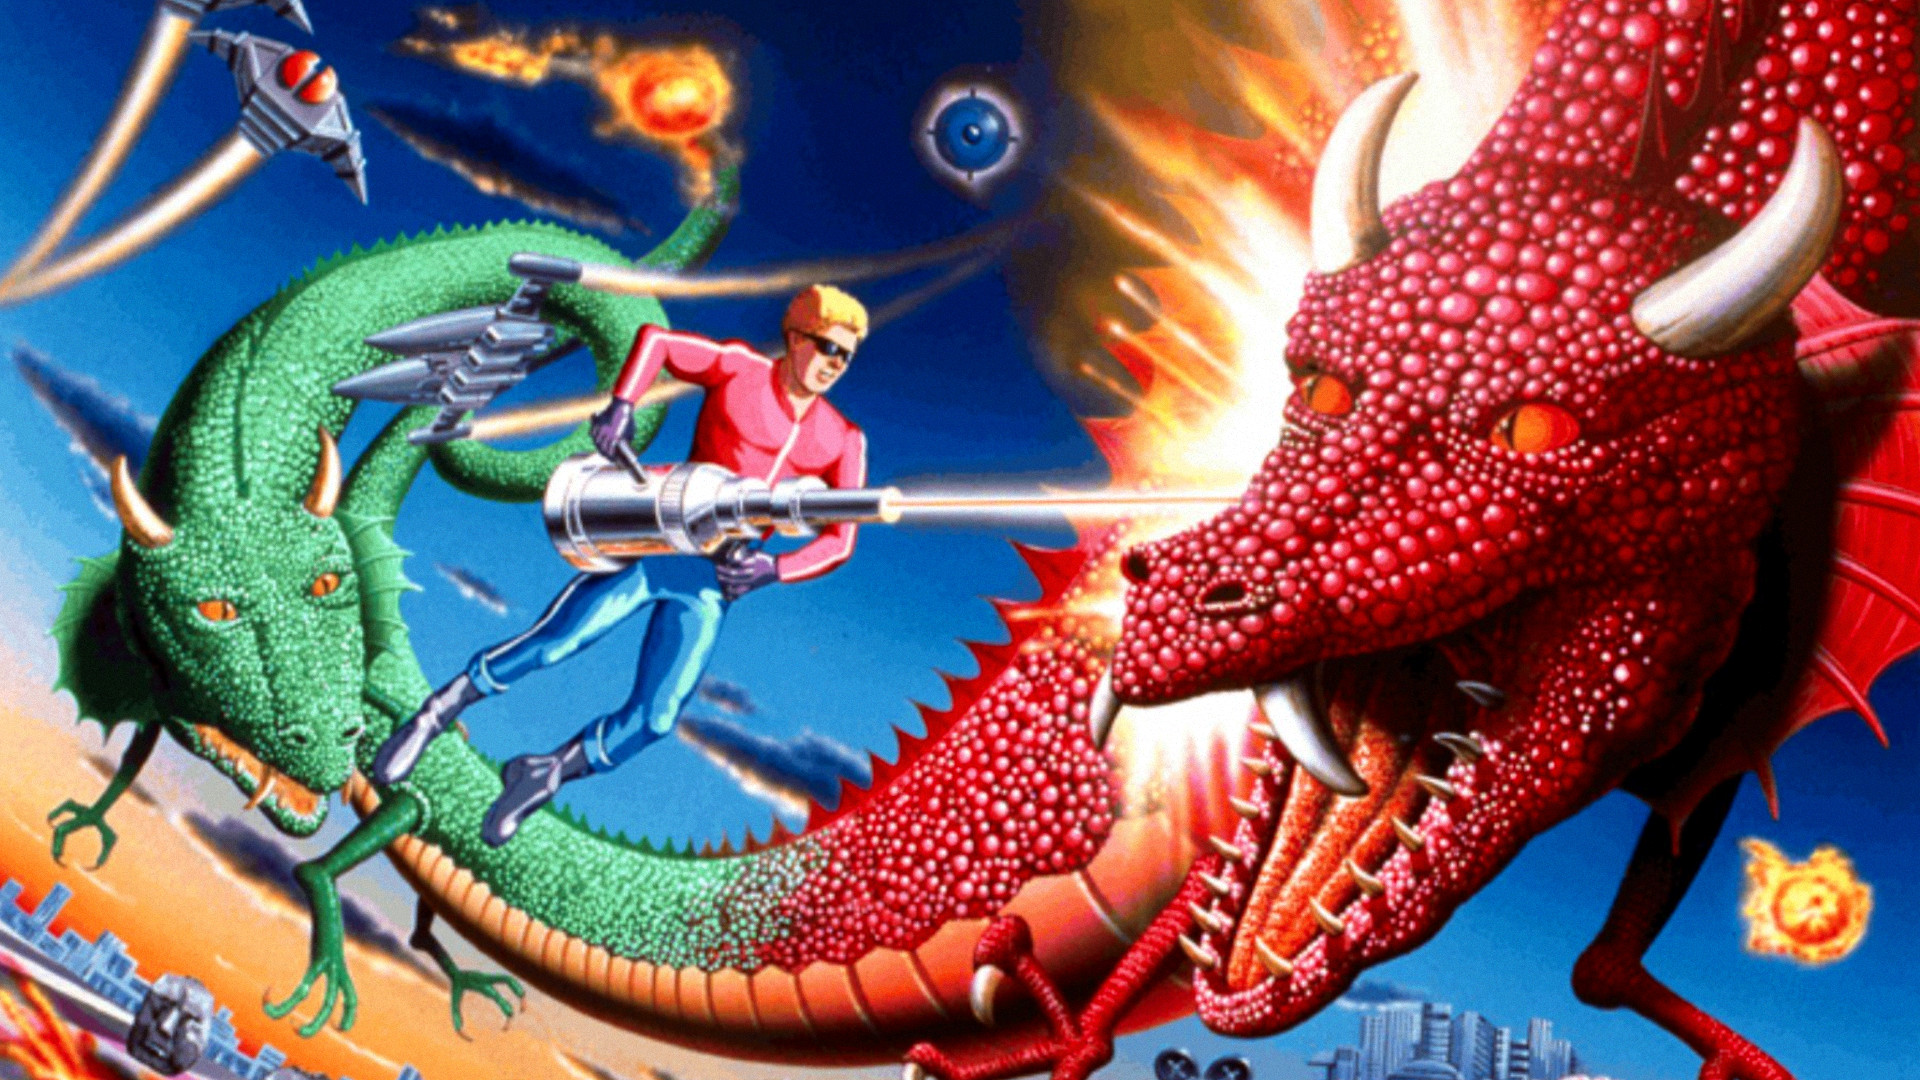 Space Harrier: Return to the Fantasy Zone